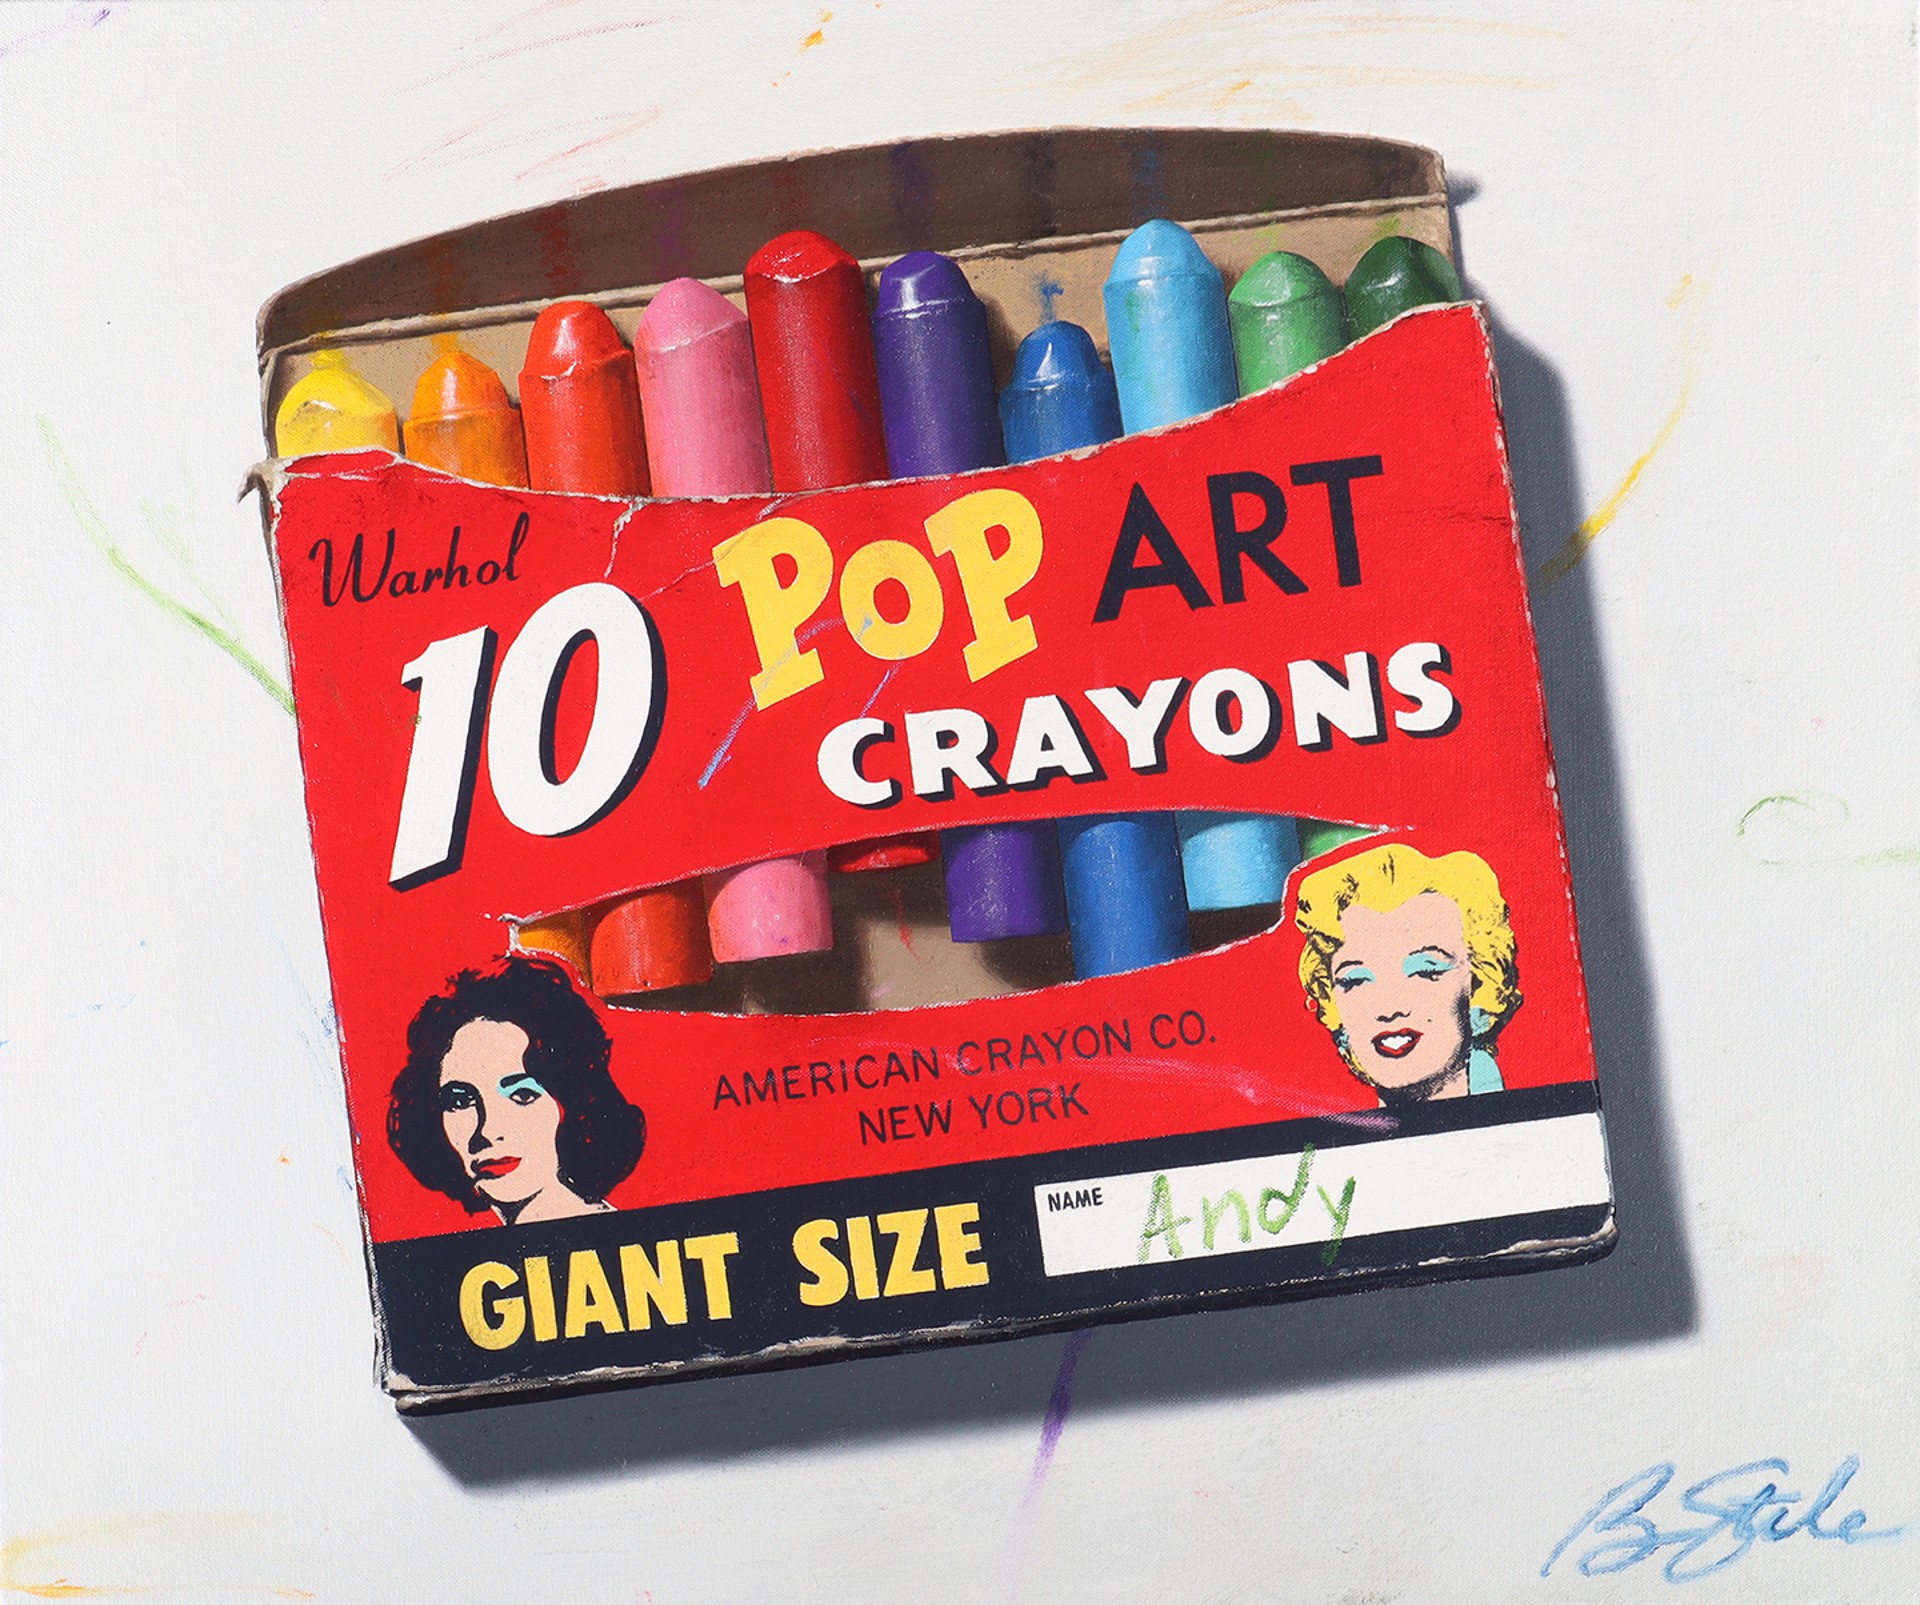 Andy's 10 Crayons by Ben Steele